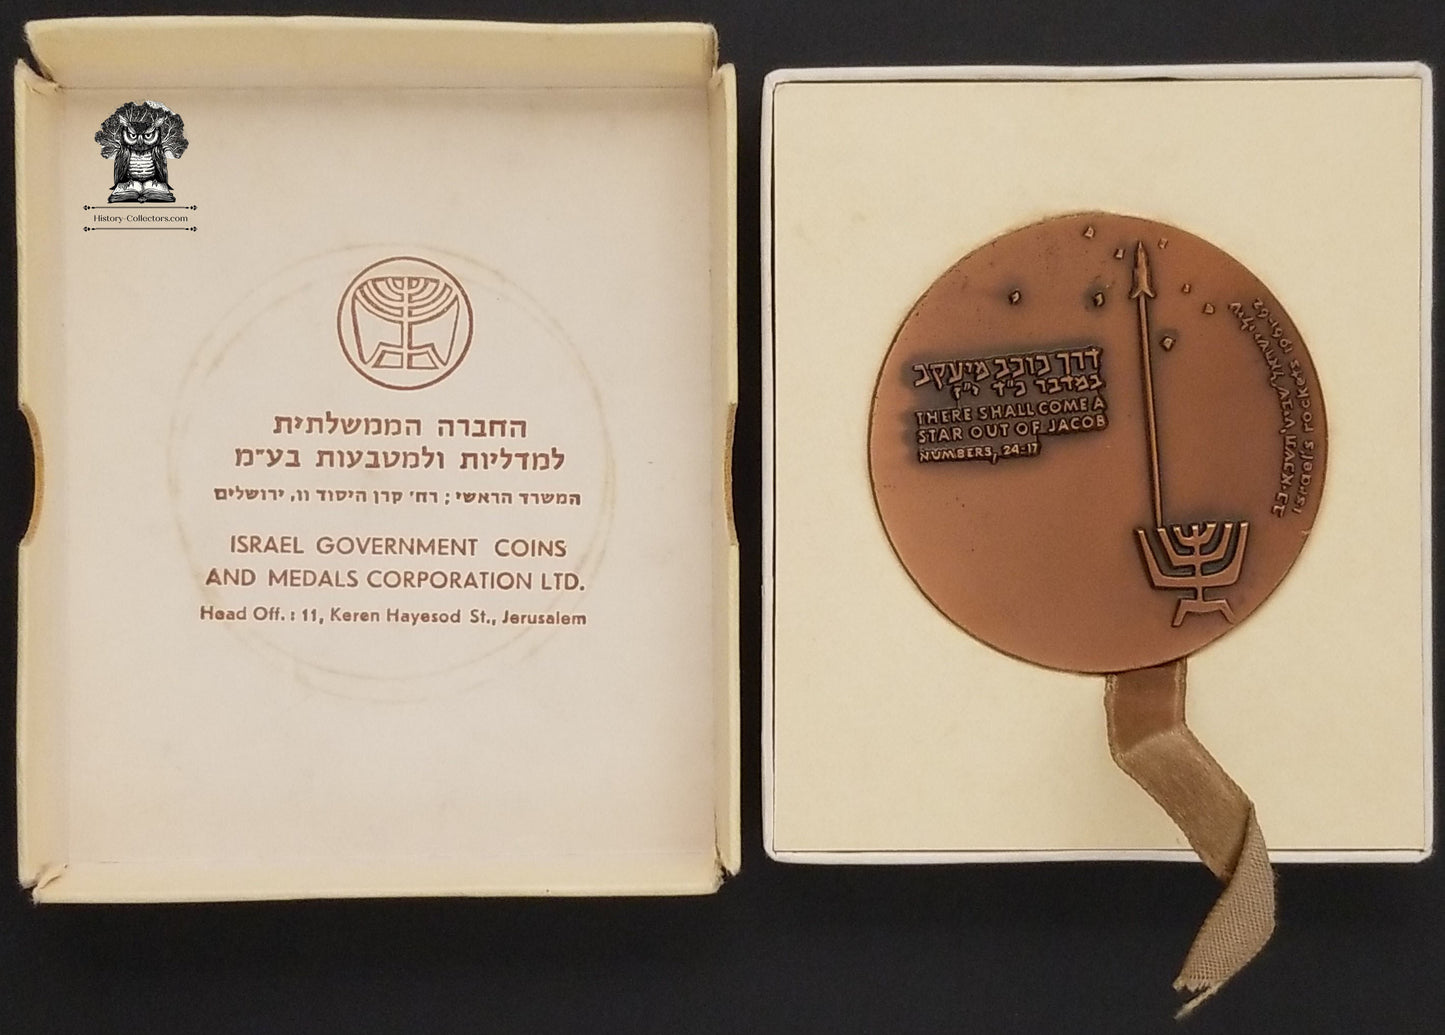 1962 Israel State Medal - Bronze - Shavit There Shall Come A Star Out Of Jacob - Numbers 24:17 - Science In The Service Of Peace - Meteorological Rocket Launch